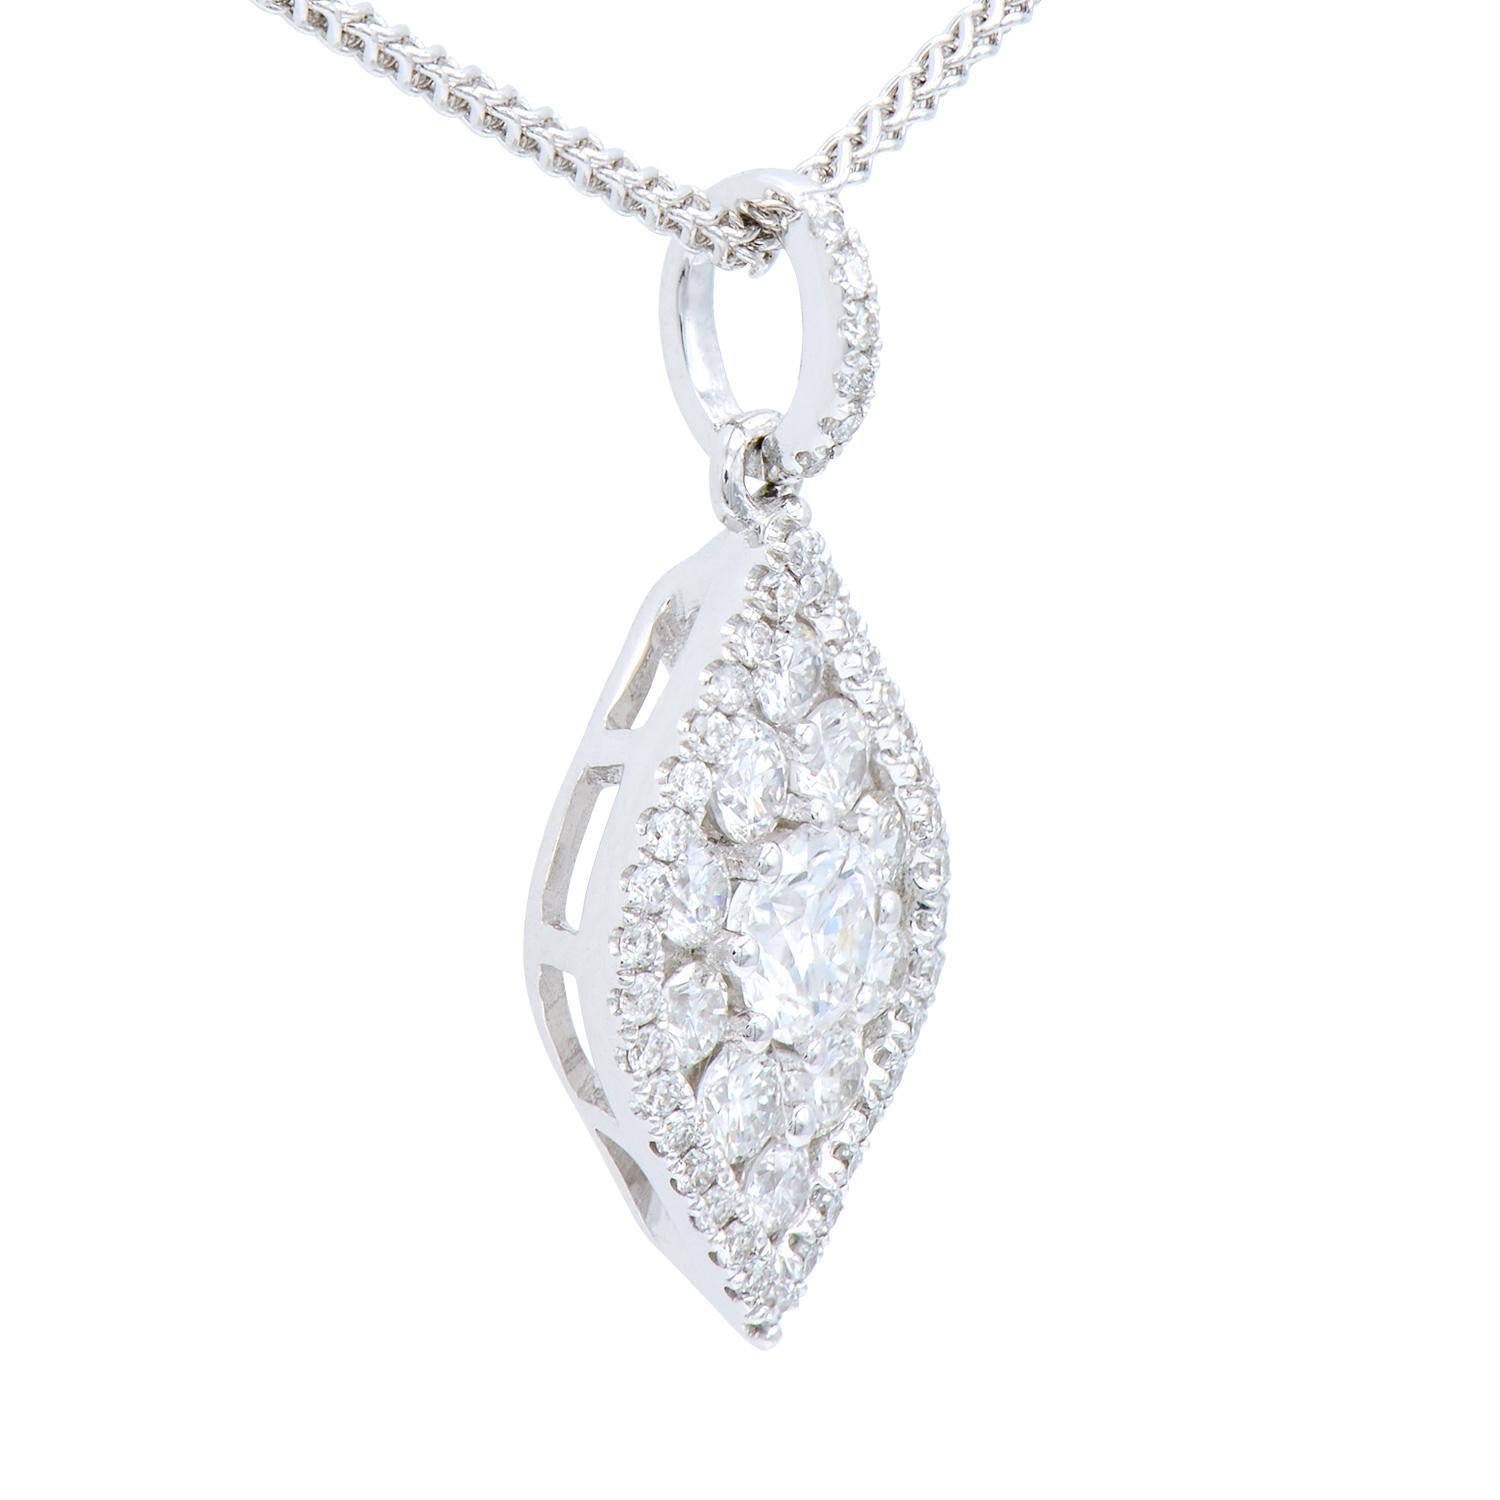 This beautiful pendant is made of 51 round VS2, G color diamonds totaling 0.58 carats to create unique design. The diamonds are set in 1.4 grams of 18 karat white gold. Included is an 18 inch, 18 karat white gold chain.